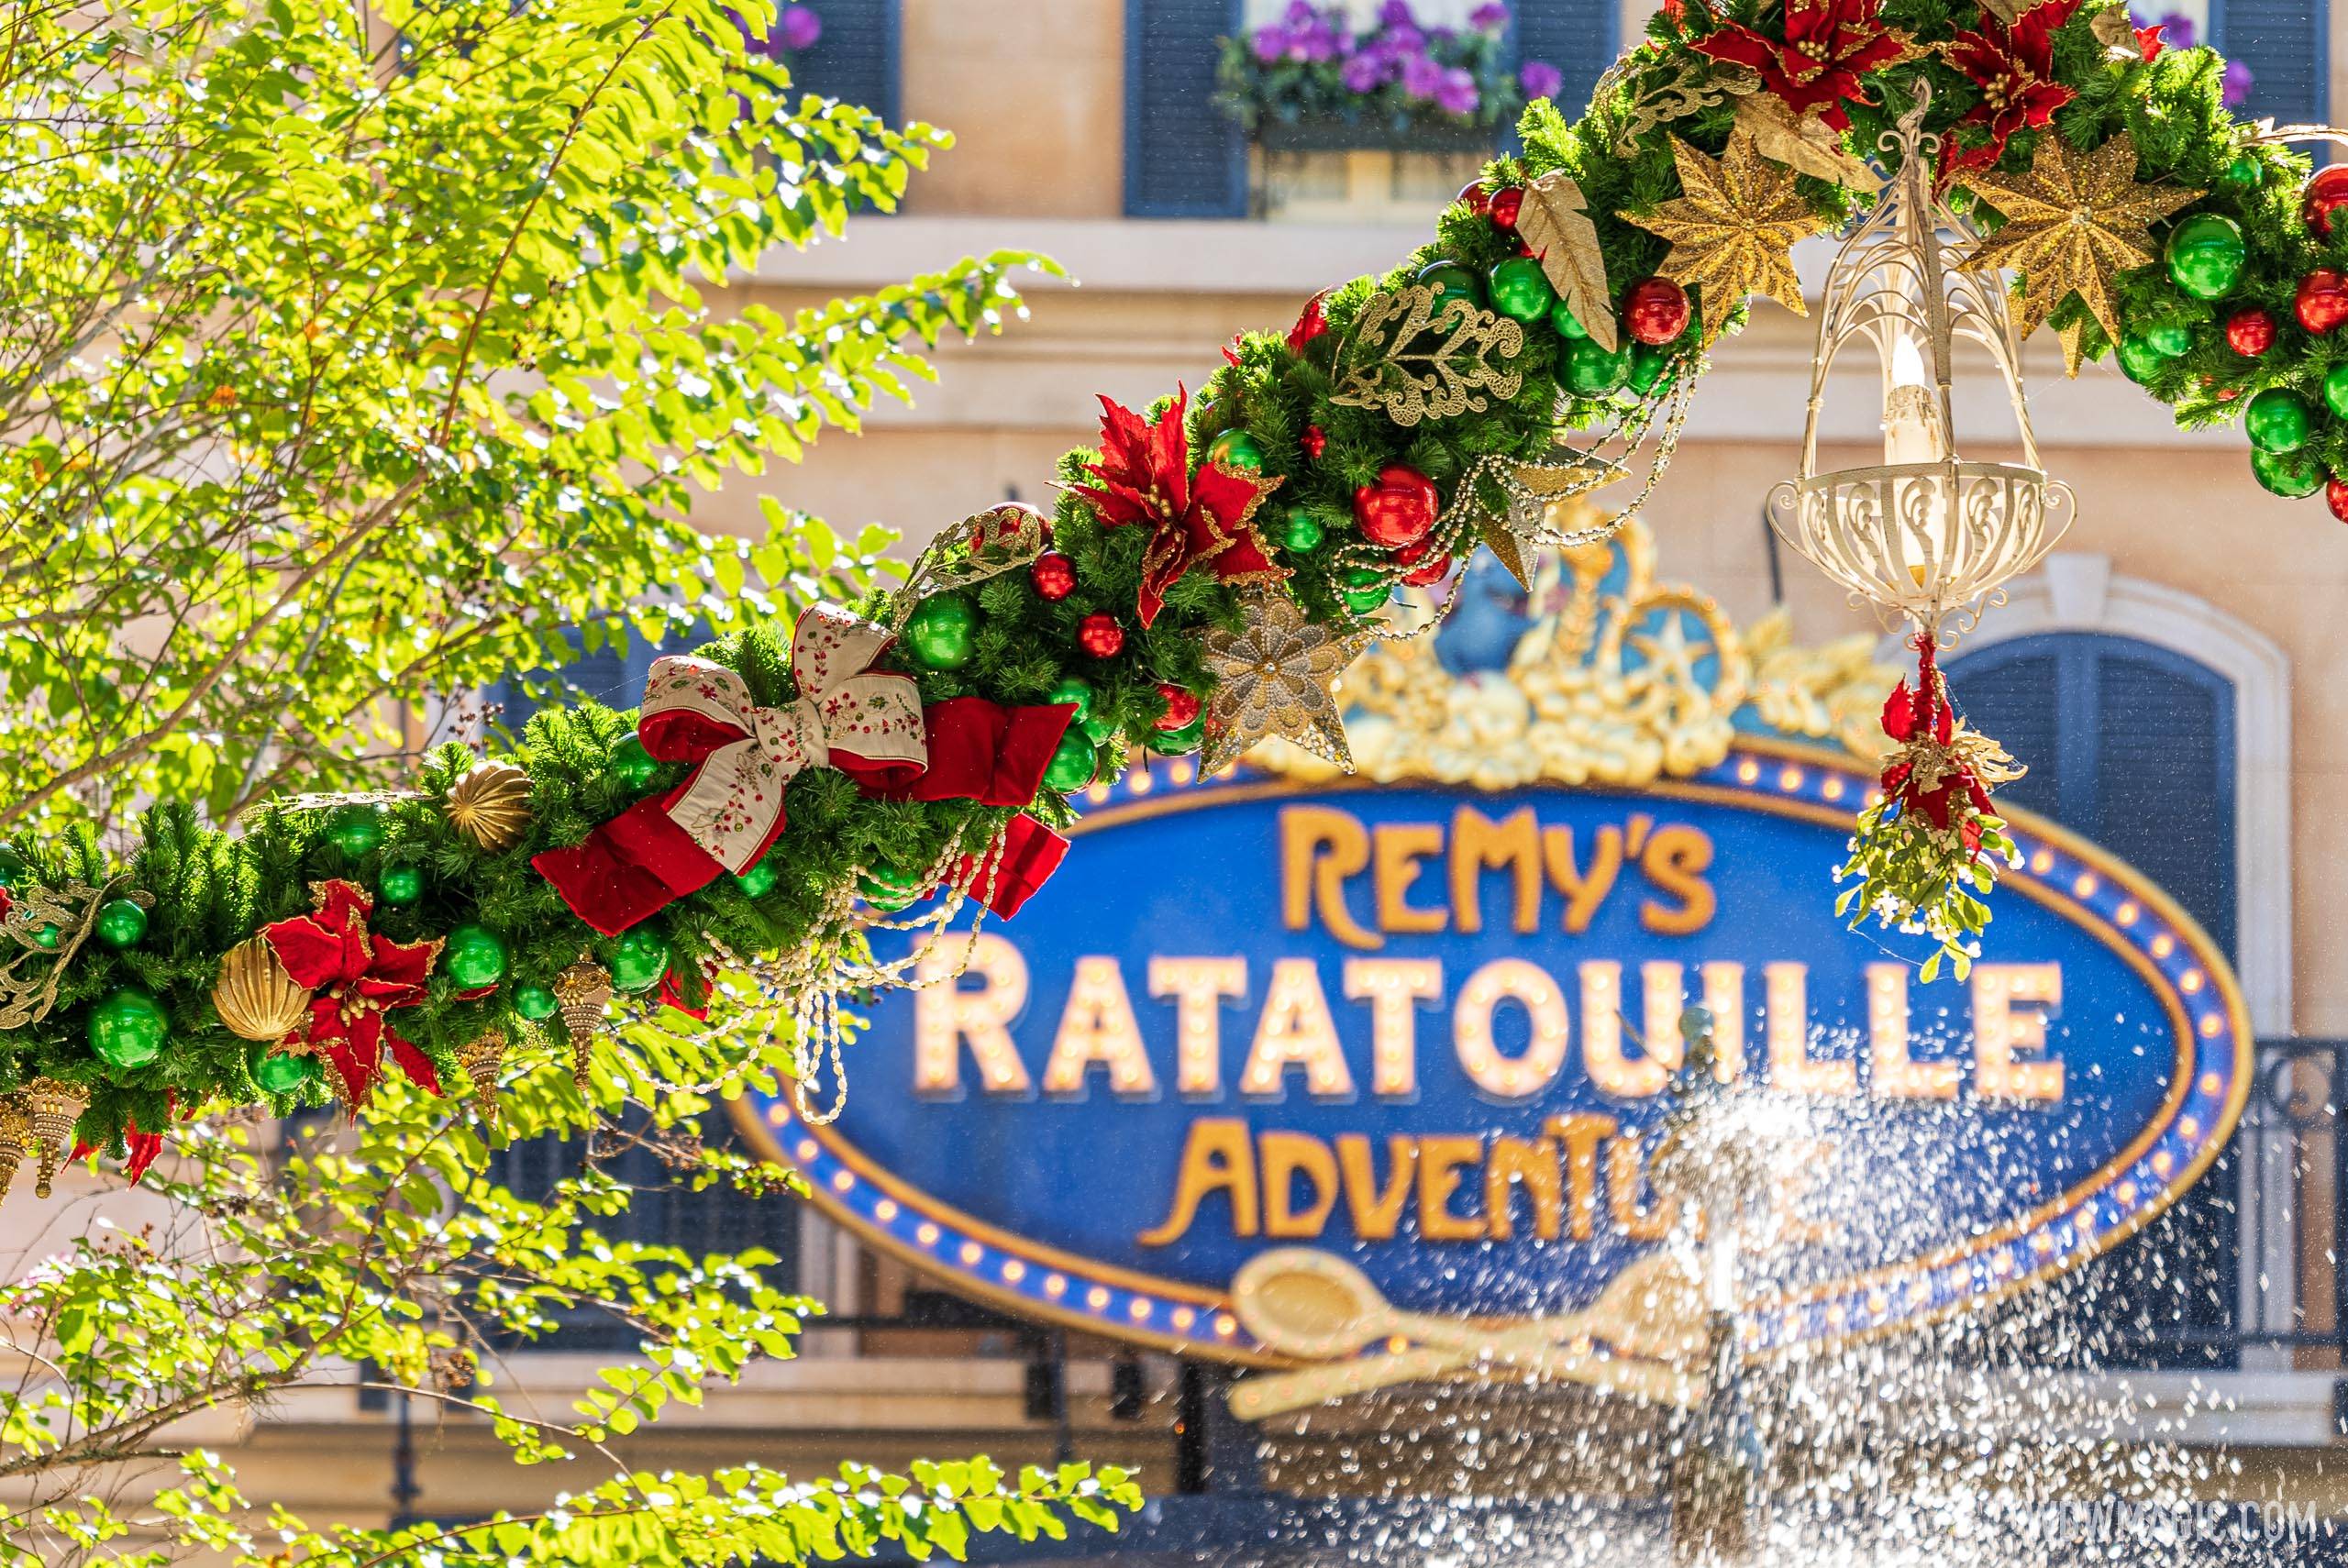 A look at the holiday decor at Remy's Ratatouille Adventure in EPCOT